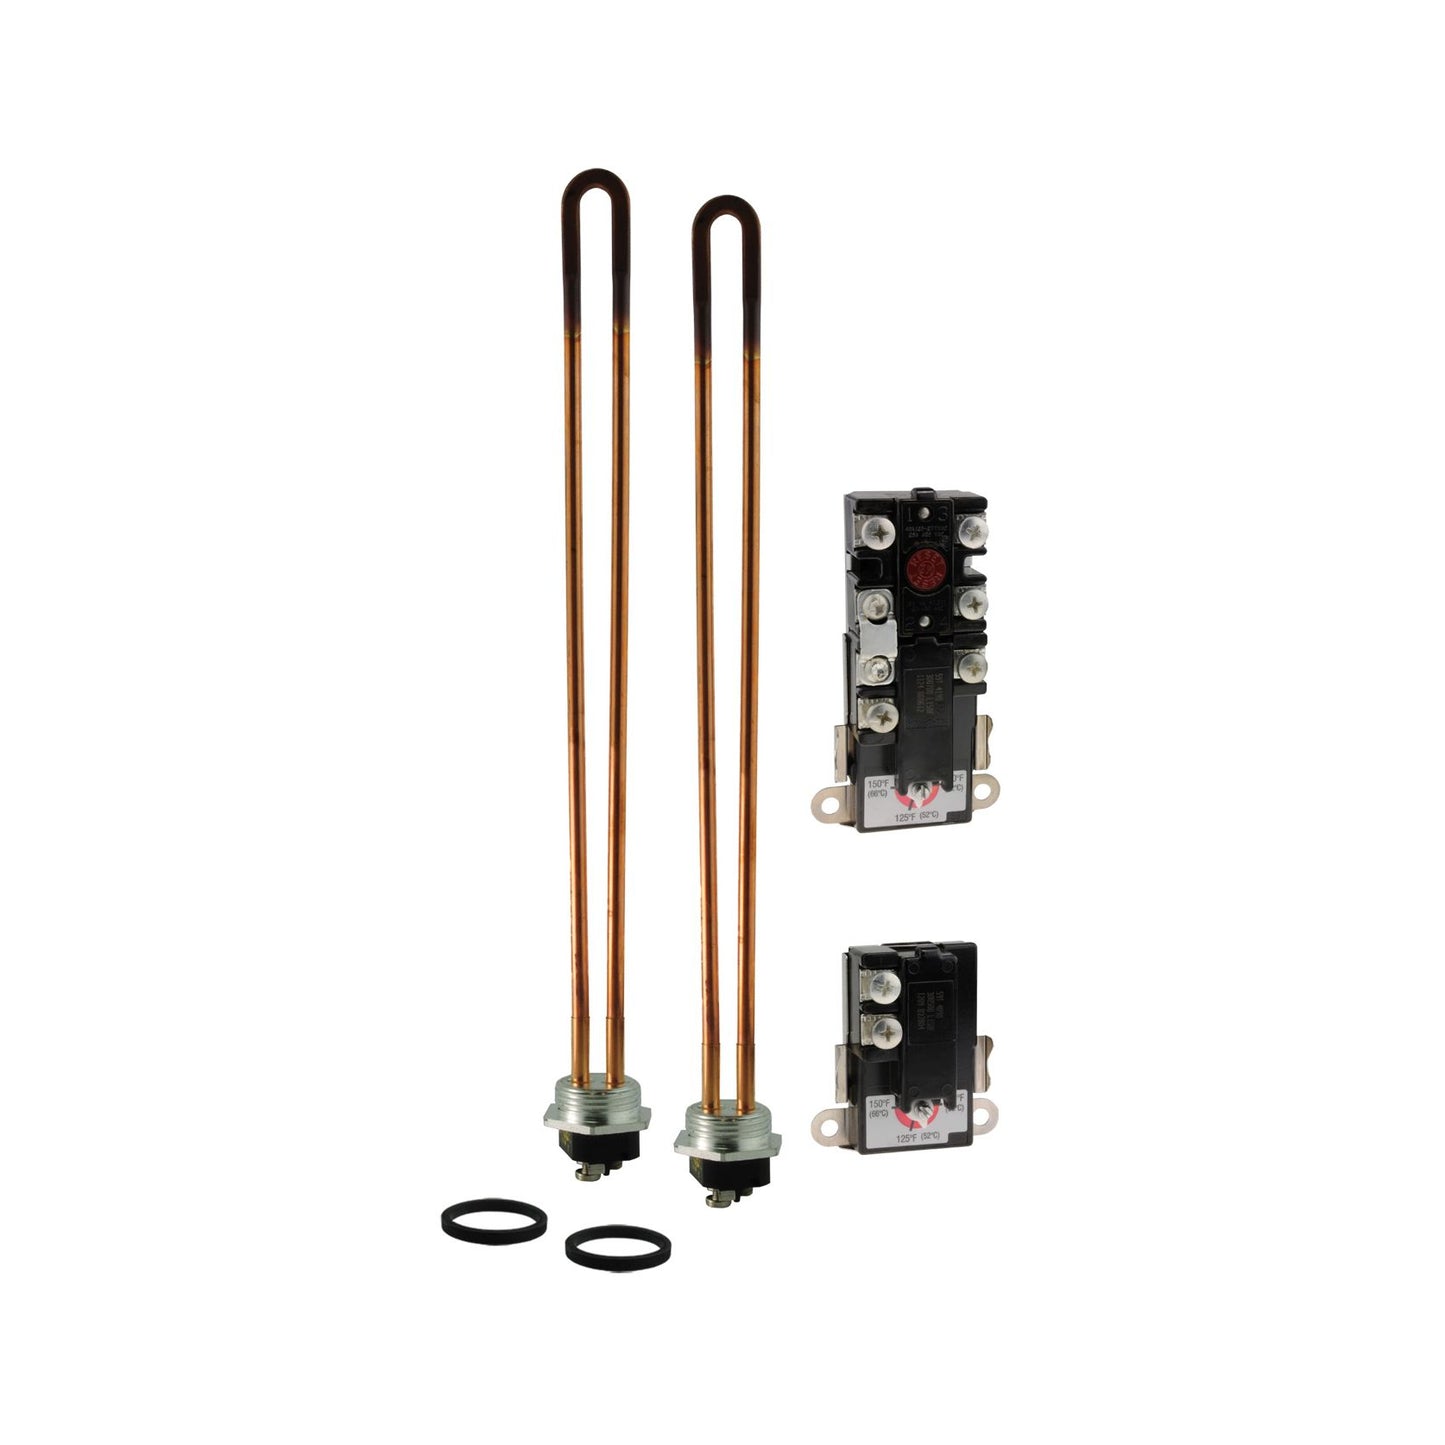 SP20060 - Electric Water Heater Tune-Up Kit